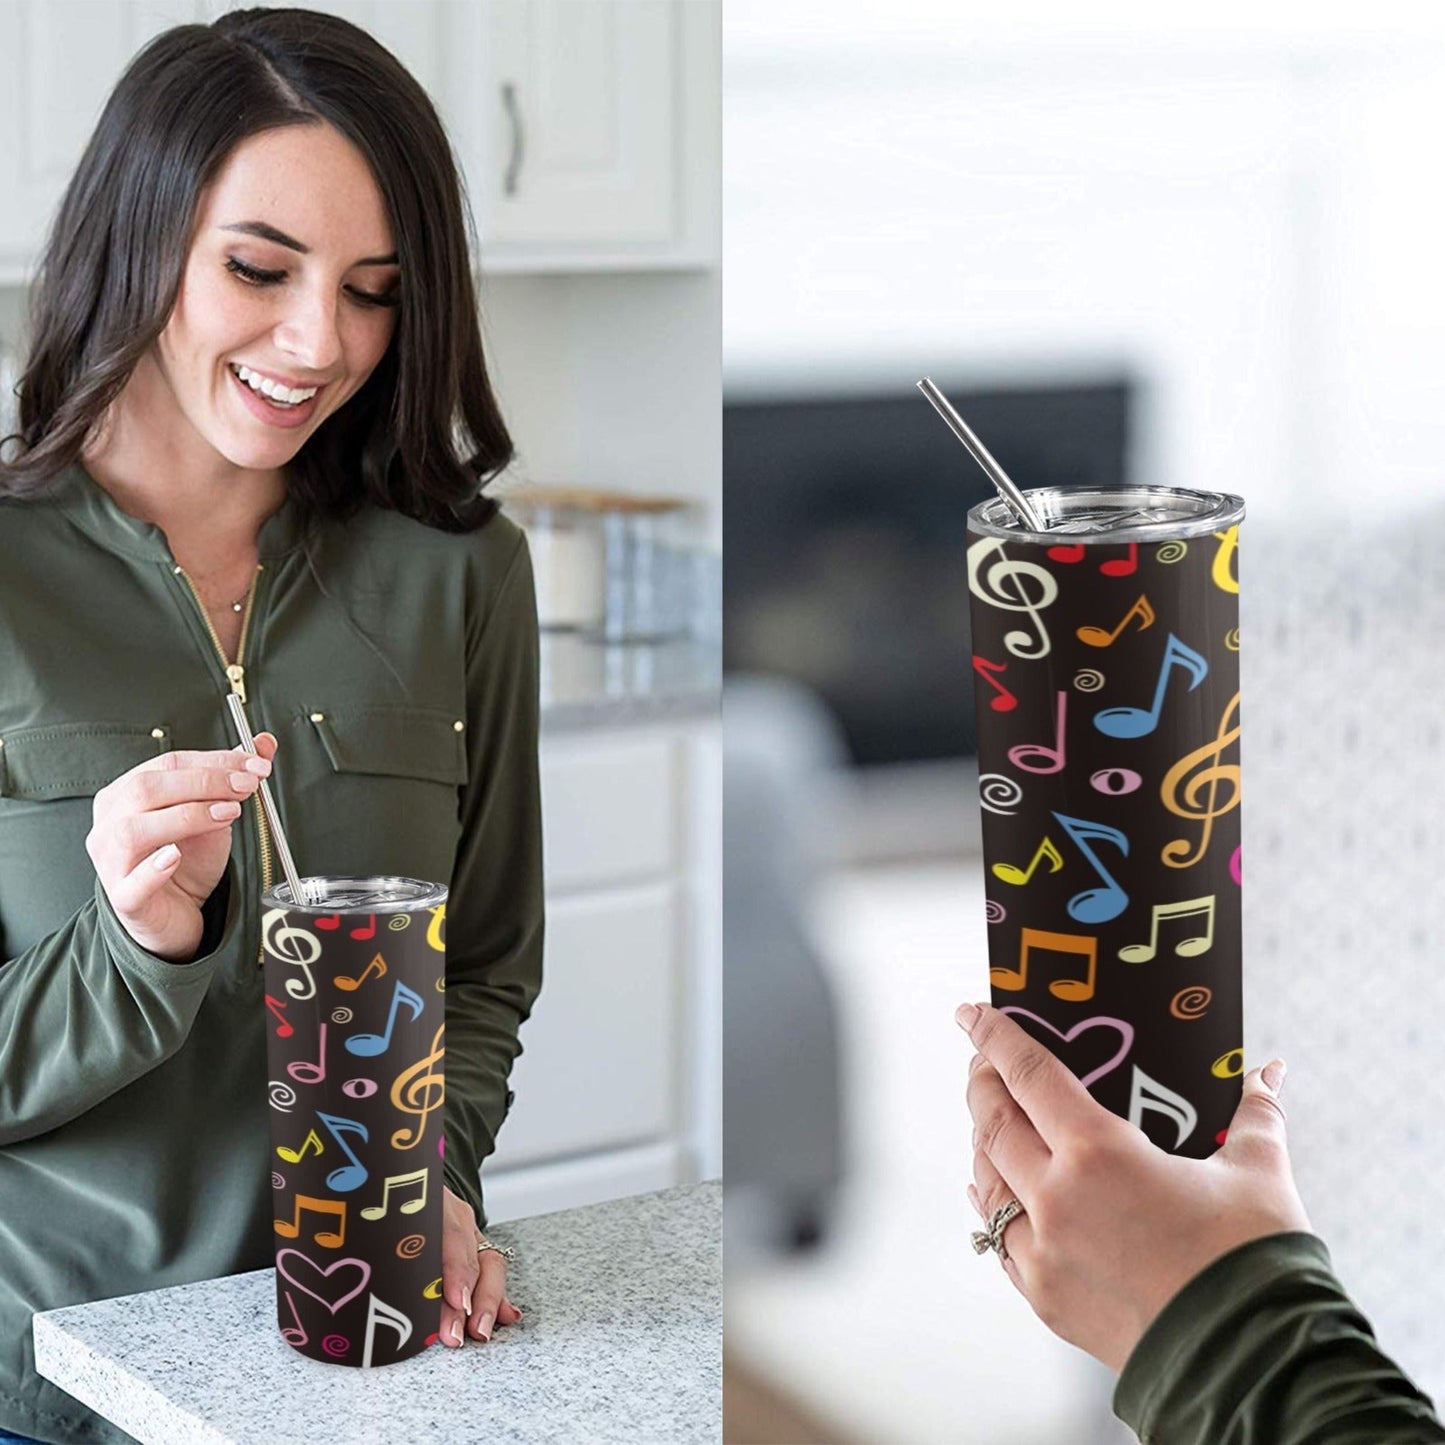 Musical Notes - 20oz Tall Skinny Tumbler with Lid and Straw 20oz Tall Skinny Tumbler with Lid and Straw